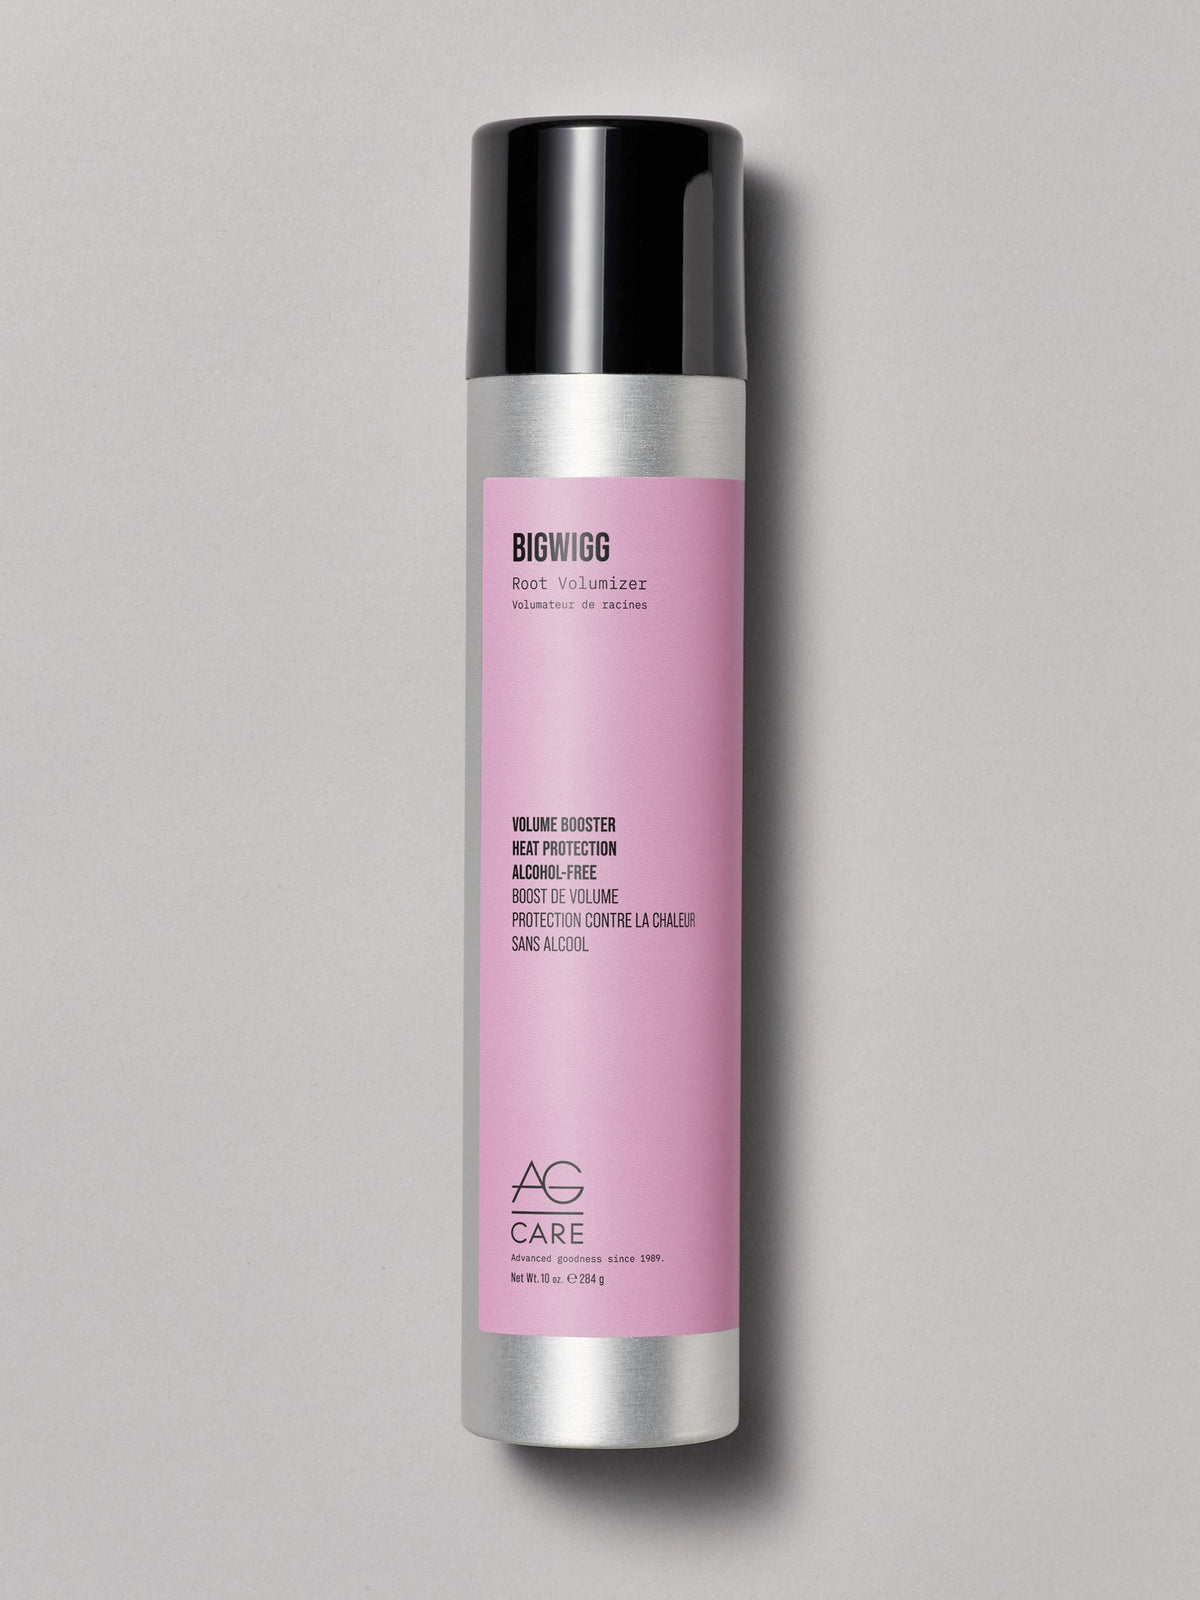 BIGWIGG Root Volumizer - by AG Hair |ProCare Outlet|